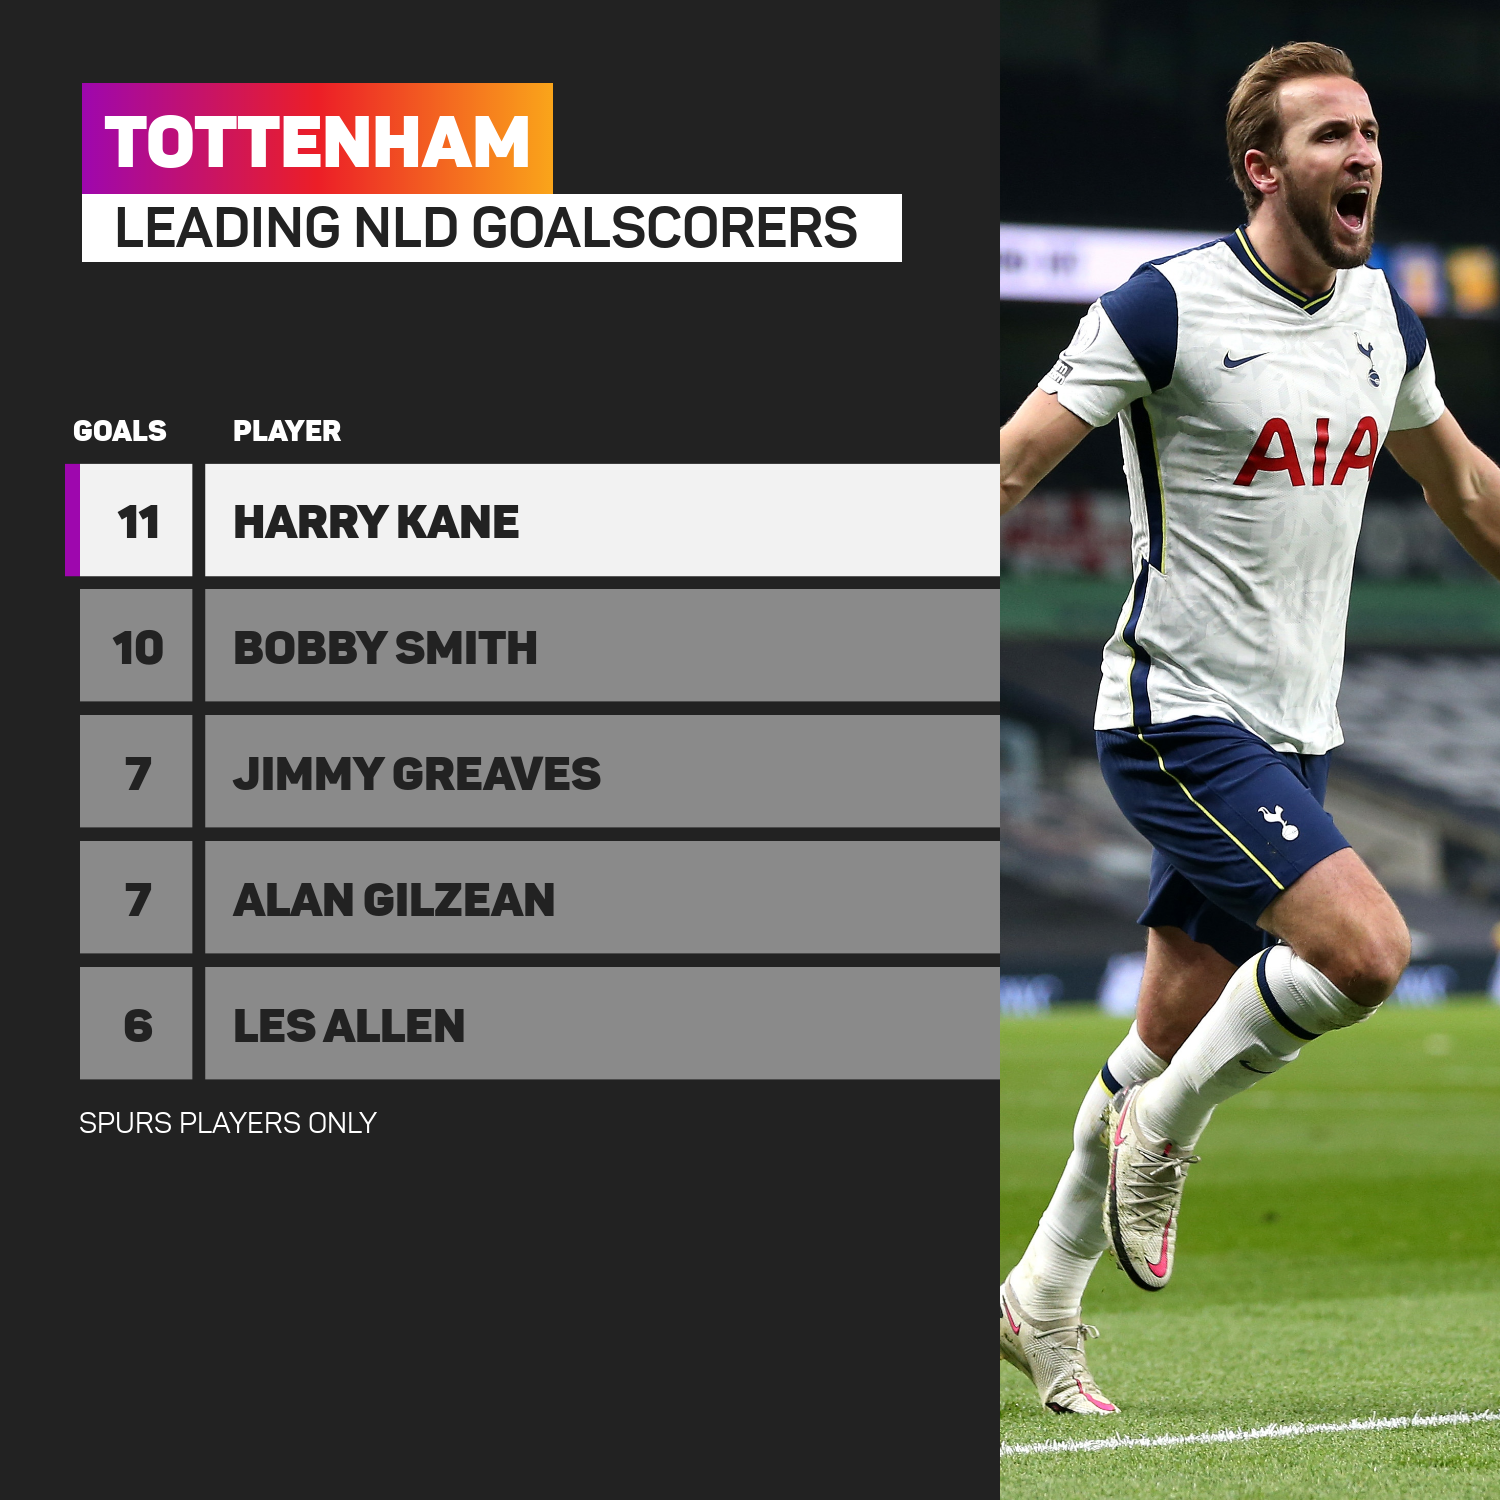 Harry Kane is the leading north London derby goalscorer